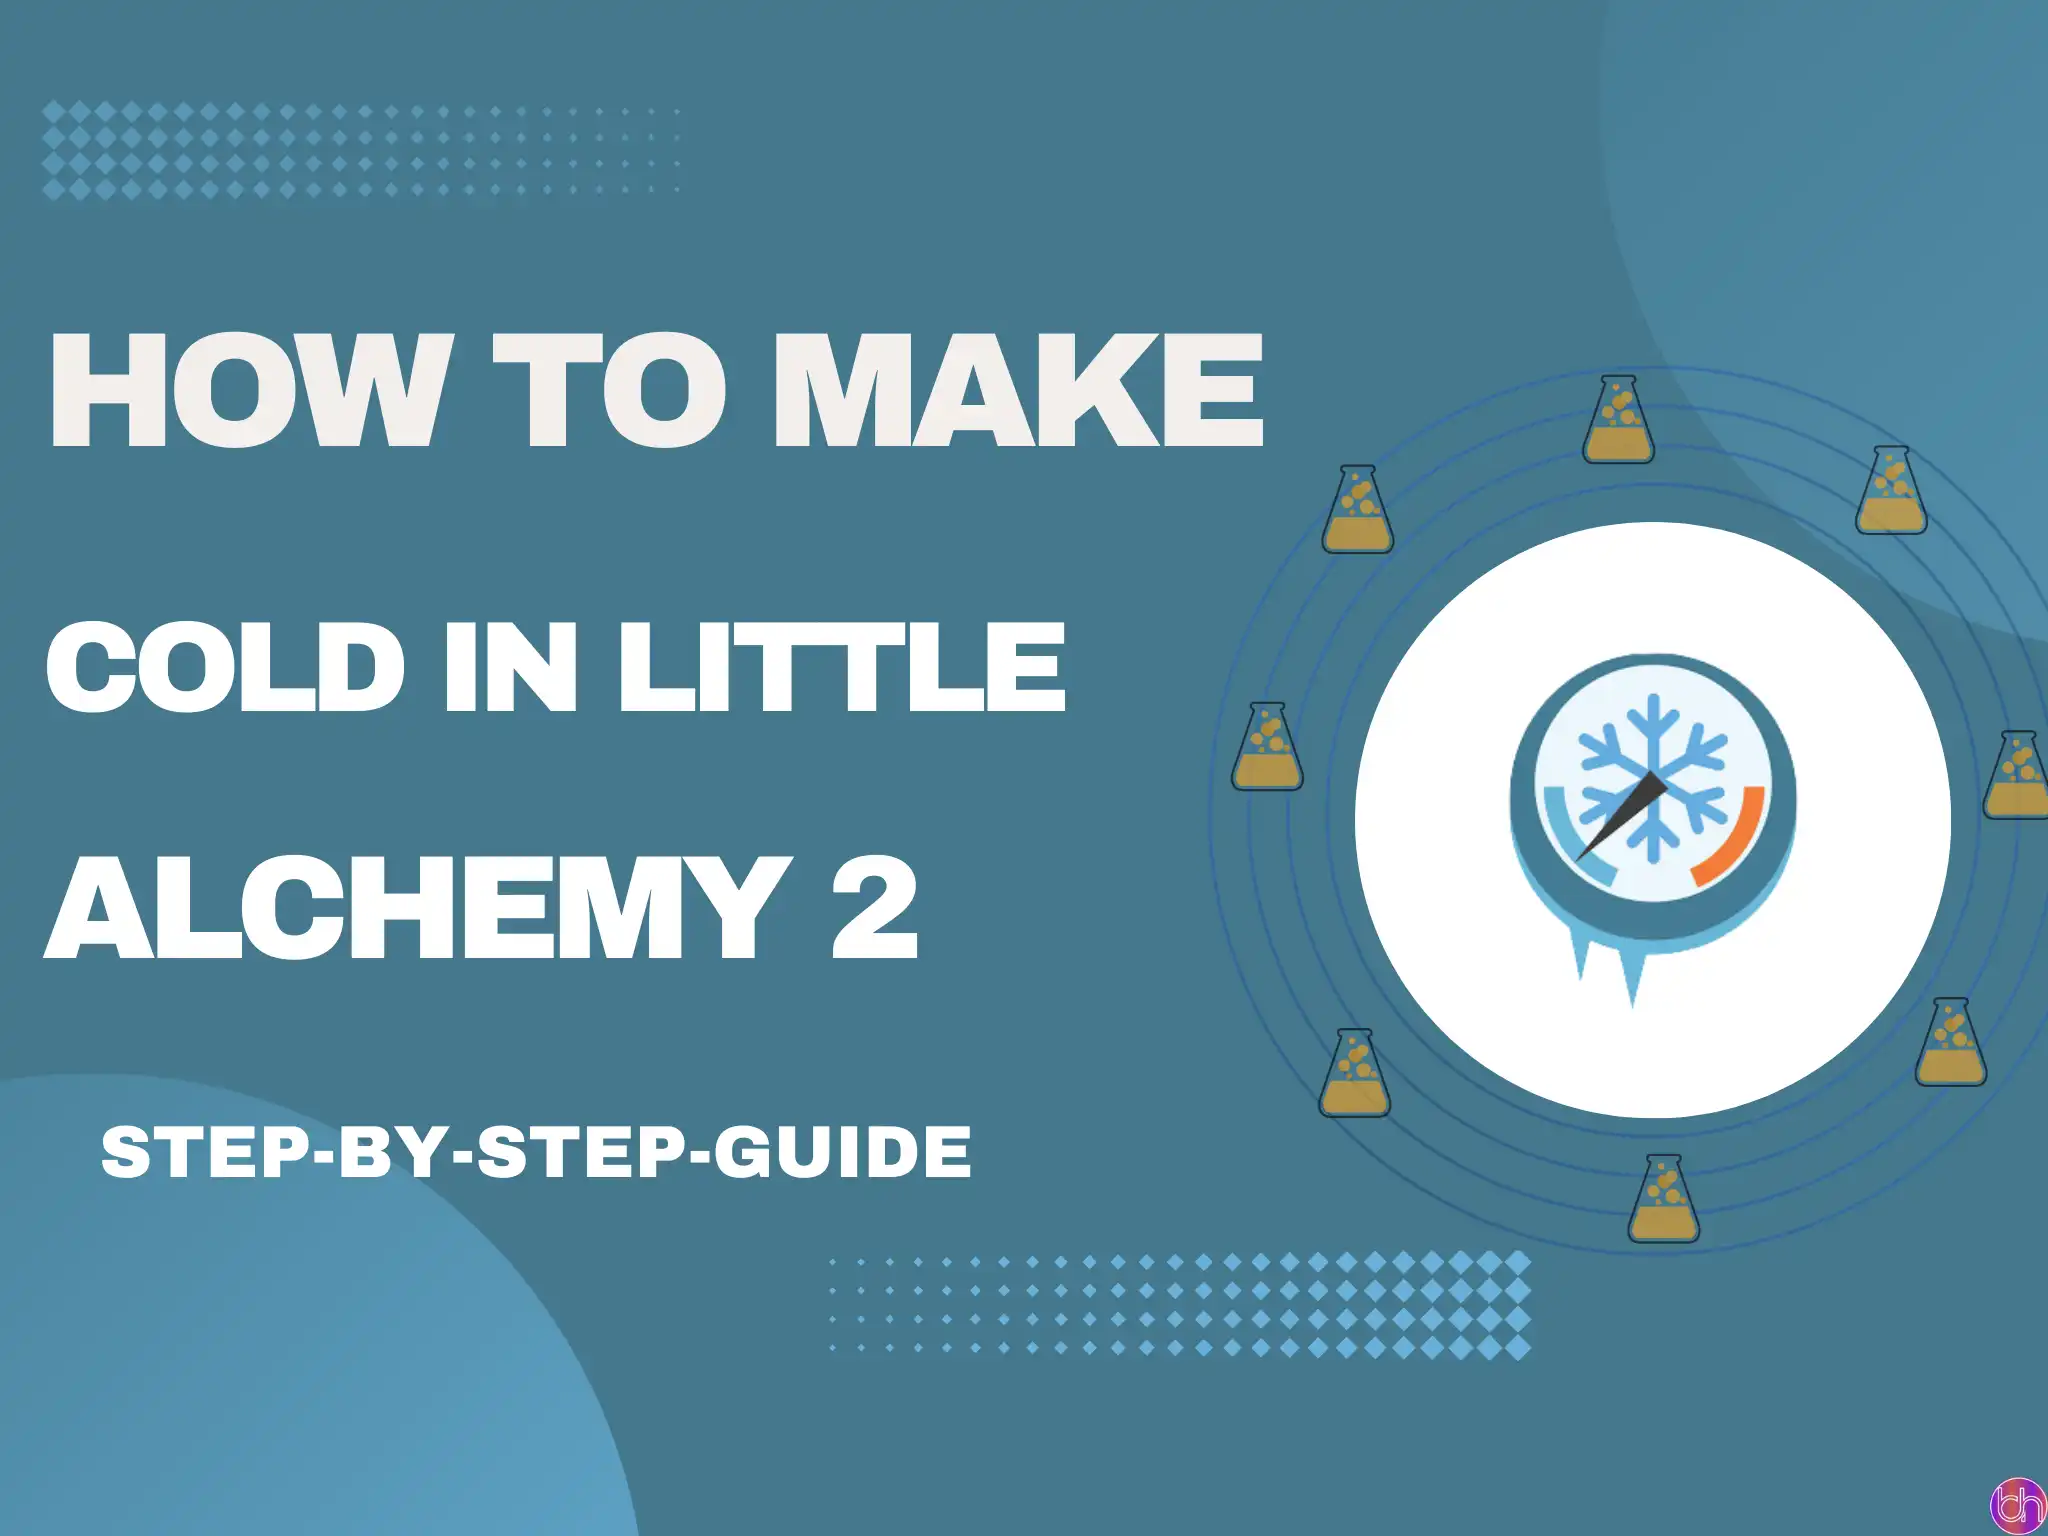 How to make Cold in Little Alchemy 2